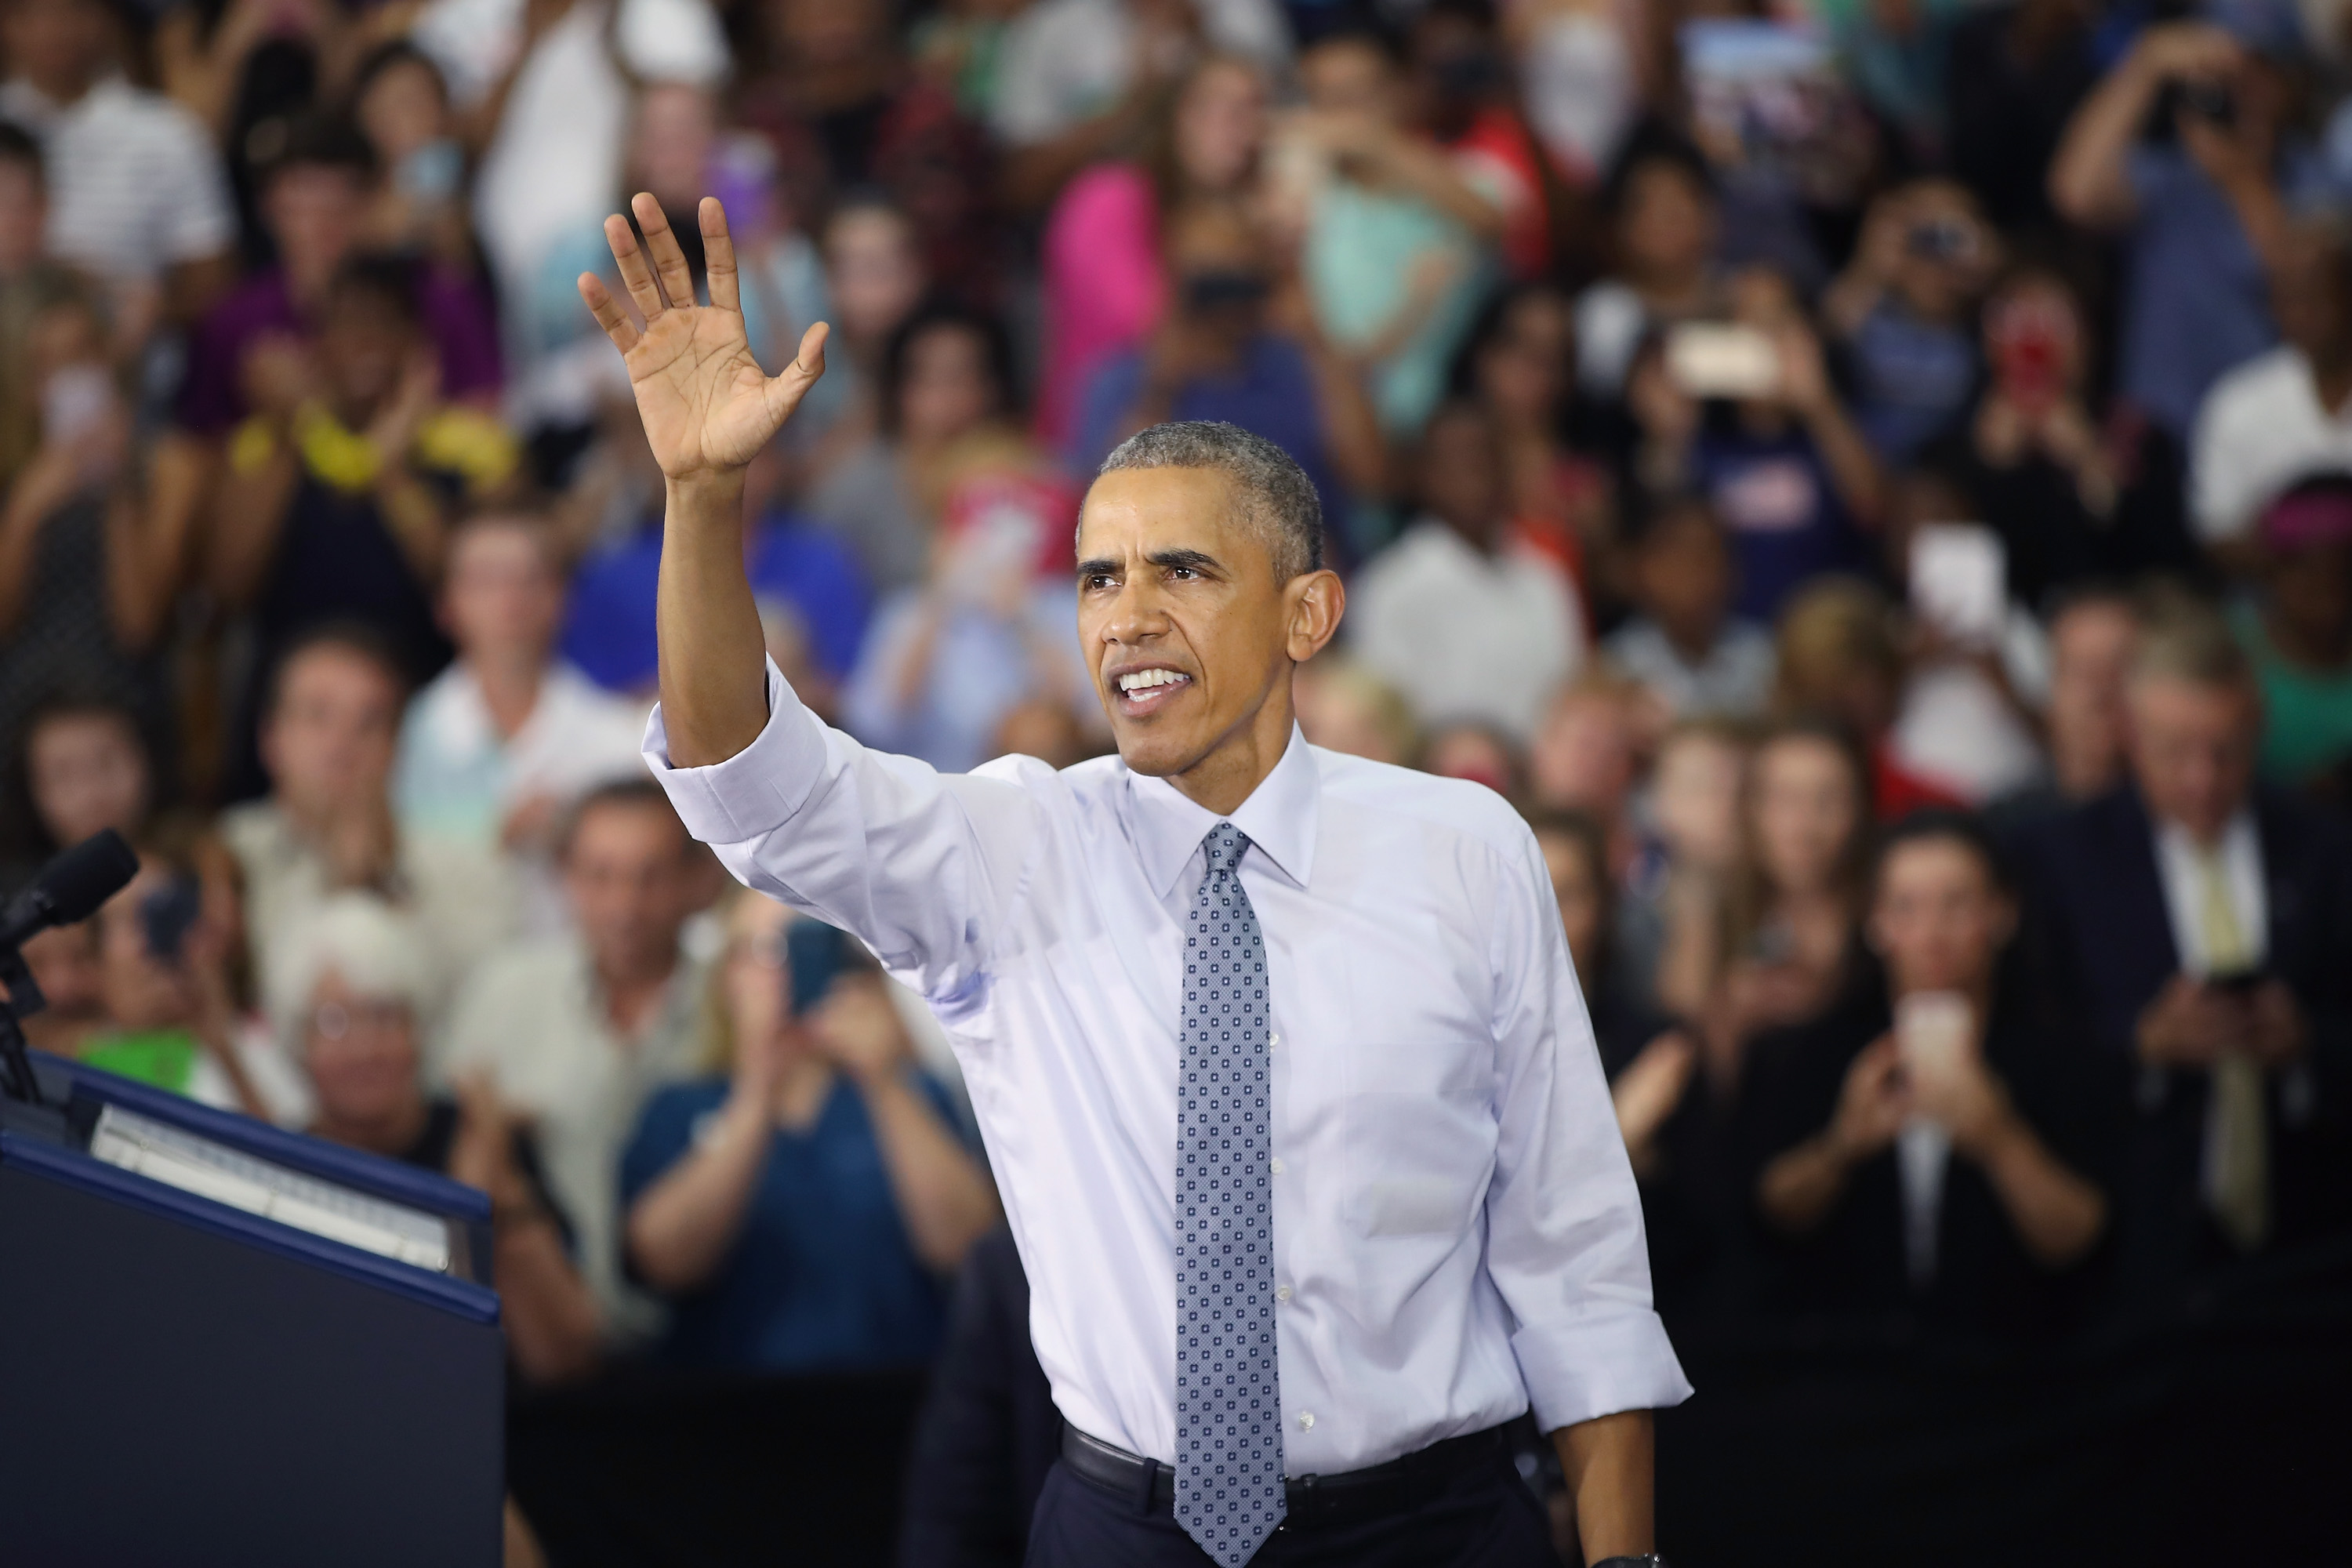 President Barack Obama waves to the crowd at Concord Community High School as he leaves after speaking on June 1, 2016 in Elkhart, Indiana. Obama returned to the school, which he visited more than seven years ago, to highlight economic progress made during his administration. Scott Olson—Getty Images (Scott Olson—Getty Images)